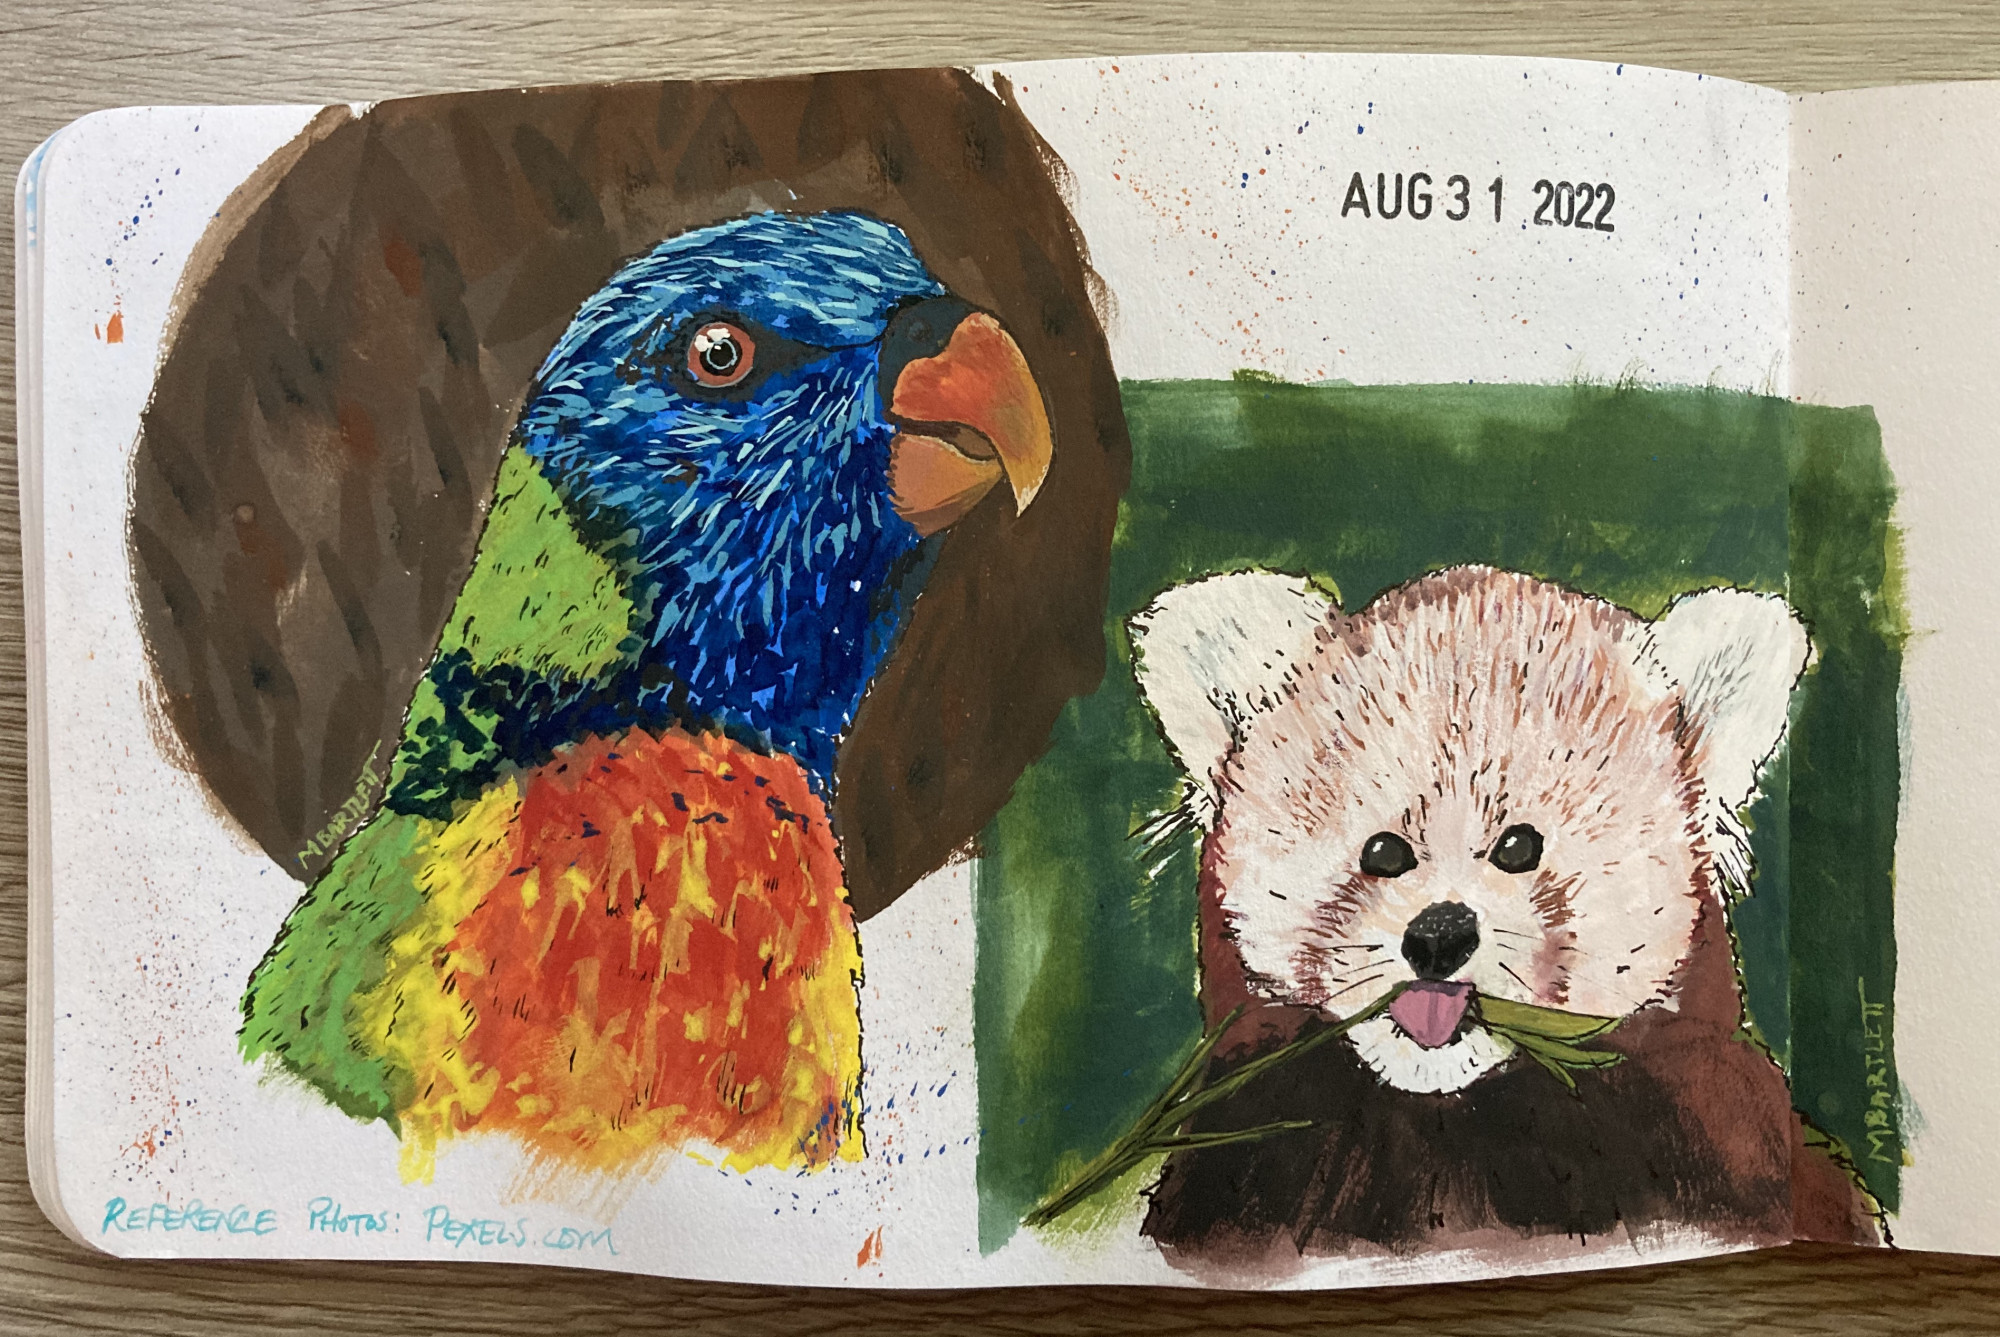 A brightly colored tropical bird and a red panda chewing on a twig, painted in a sketchbook